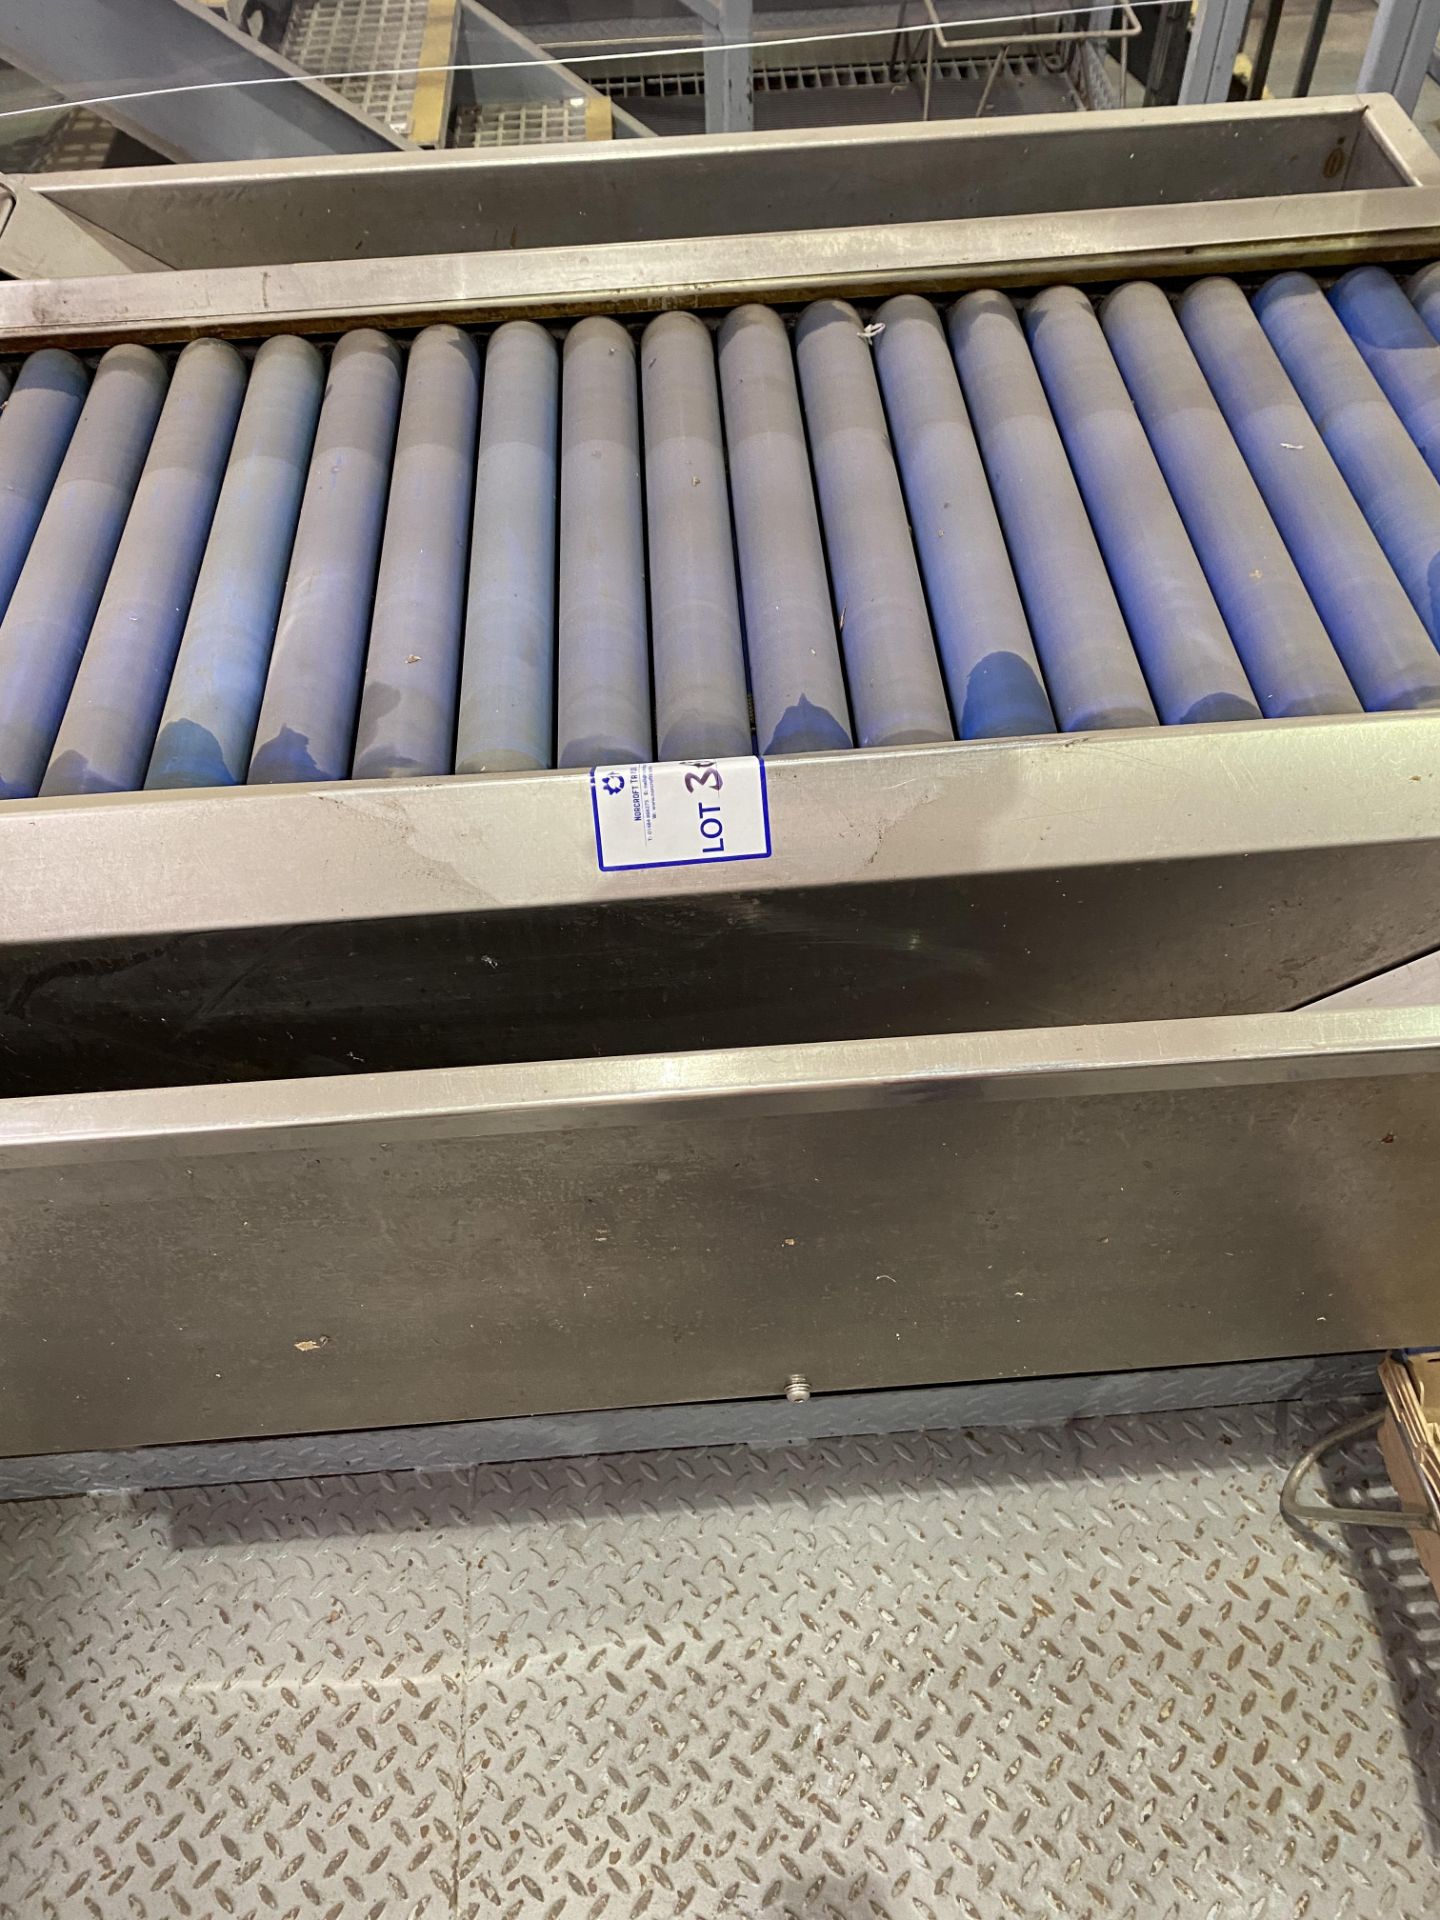 Stainless Steel inspection roller table - Image 2 of 2